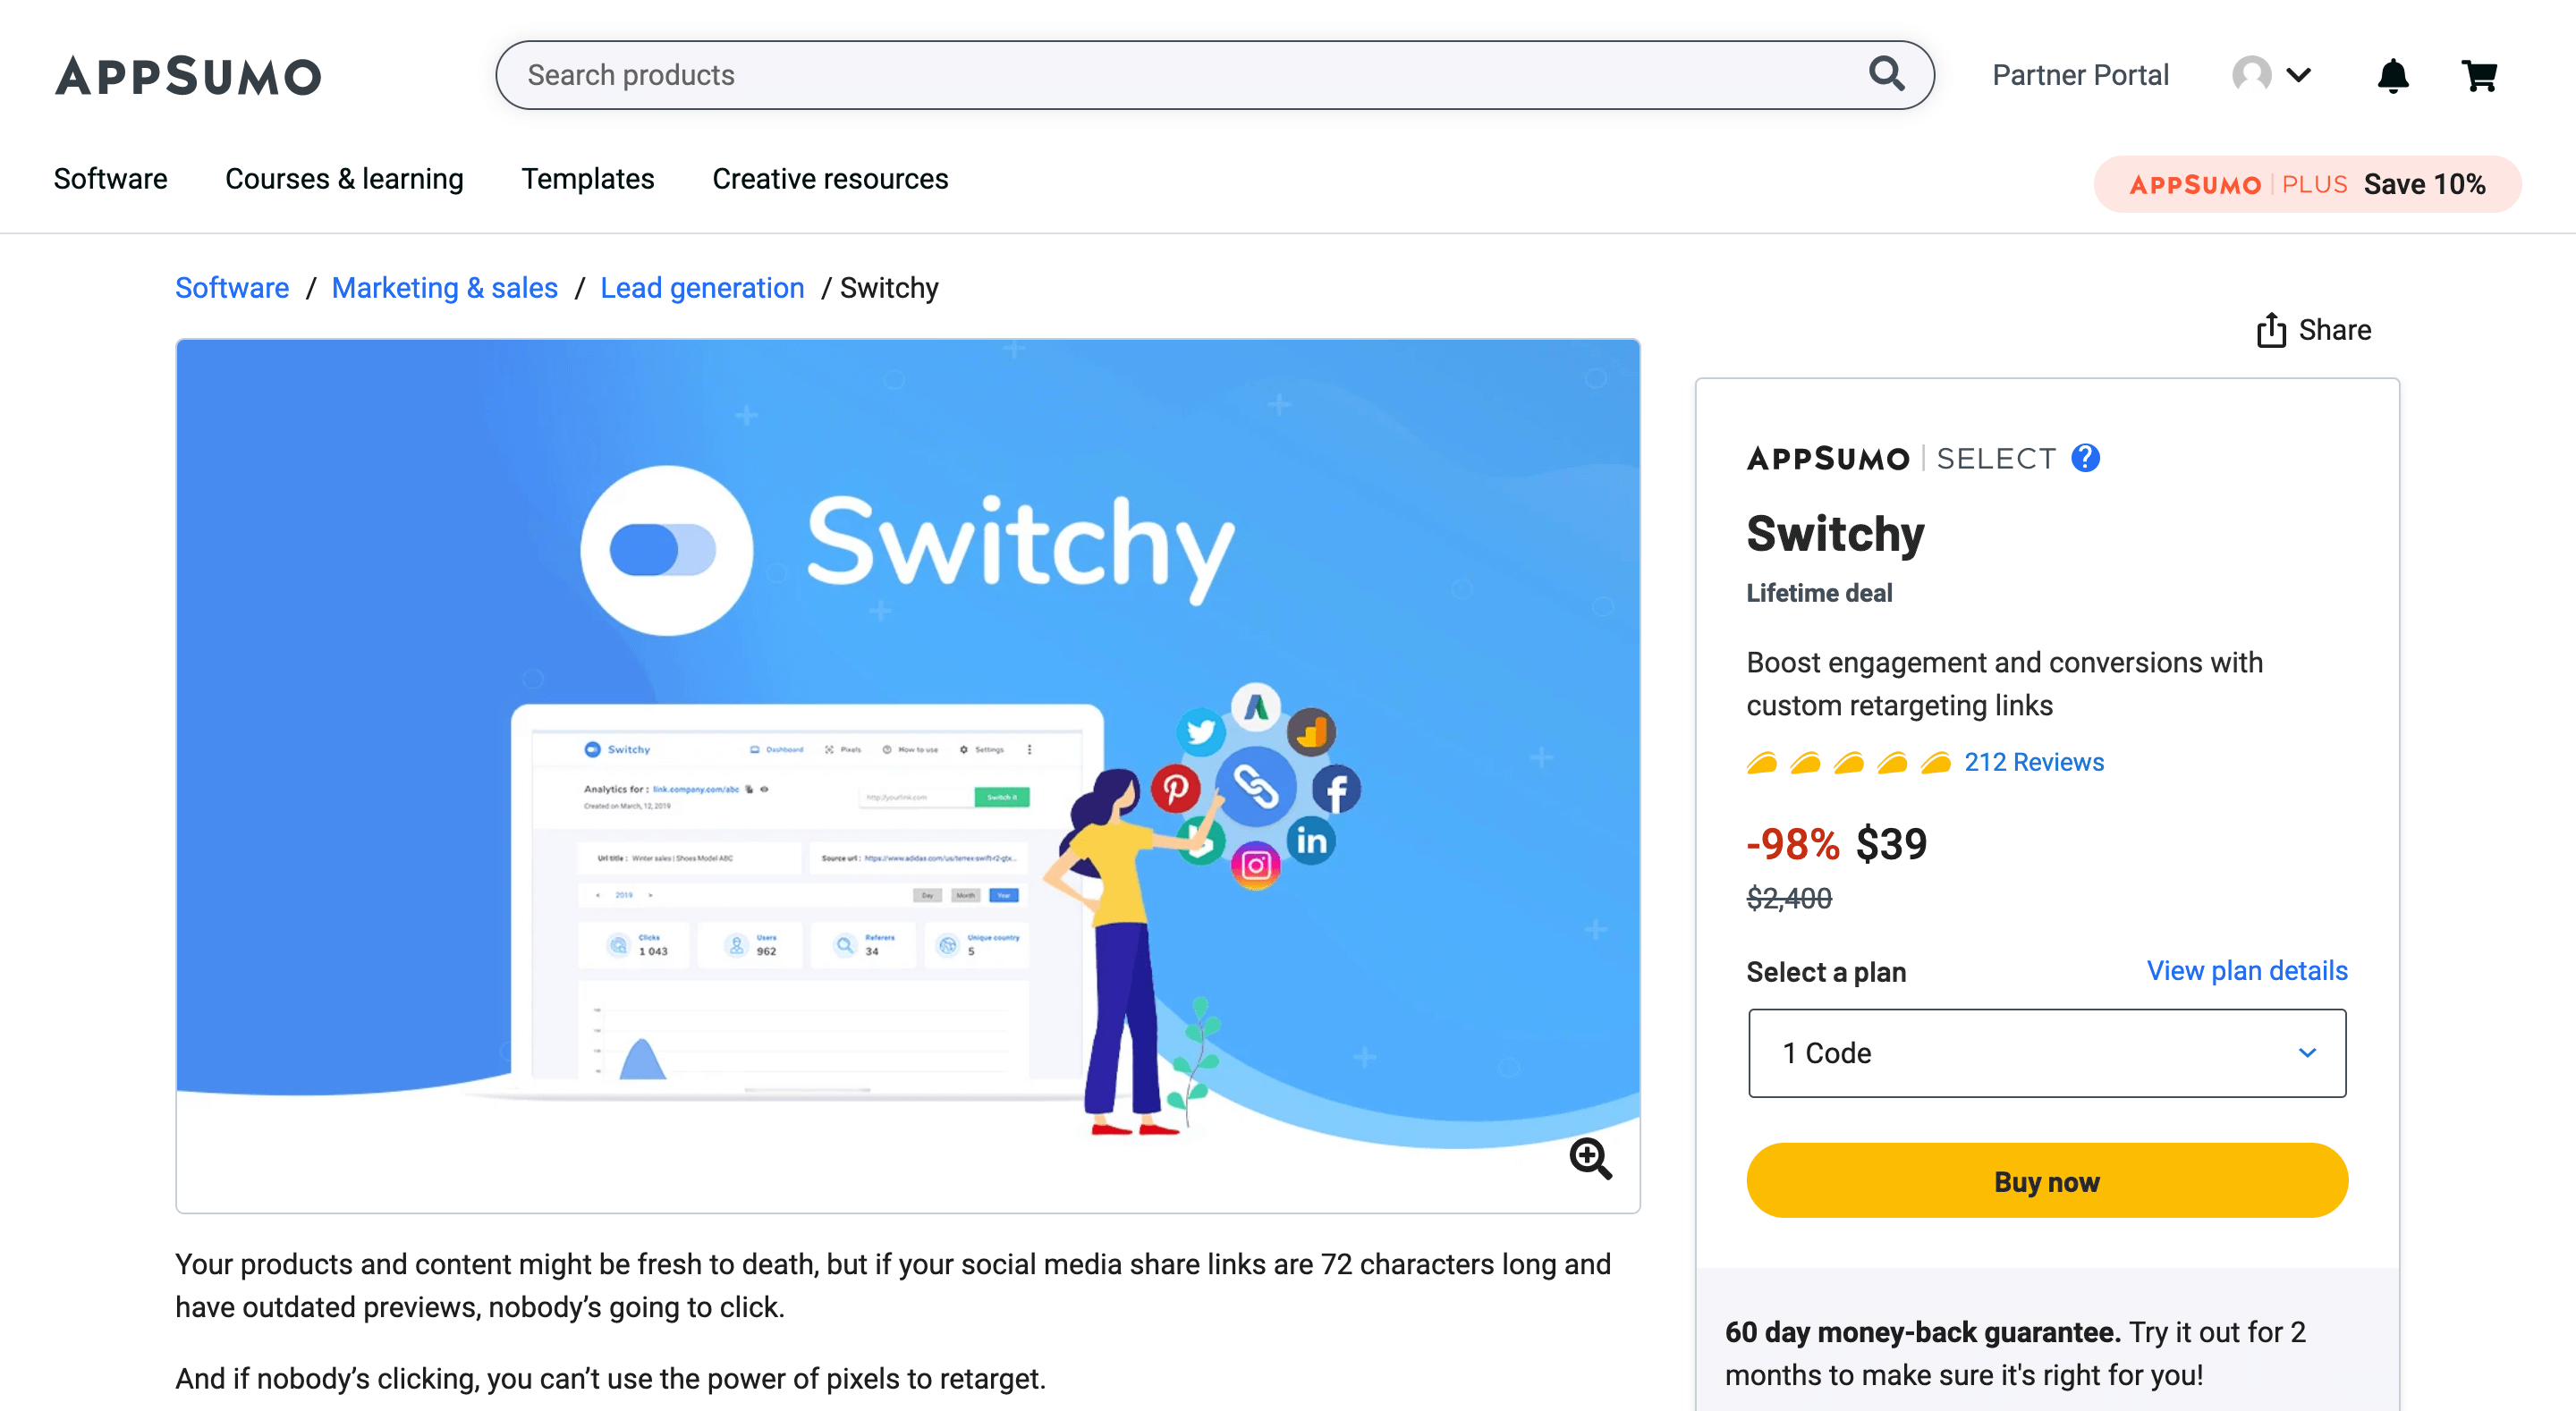 Switchy Appsumo deal